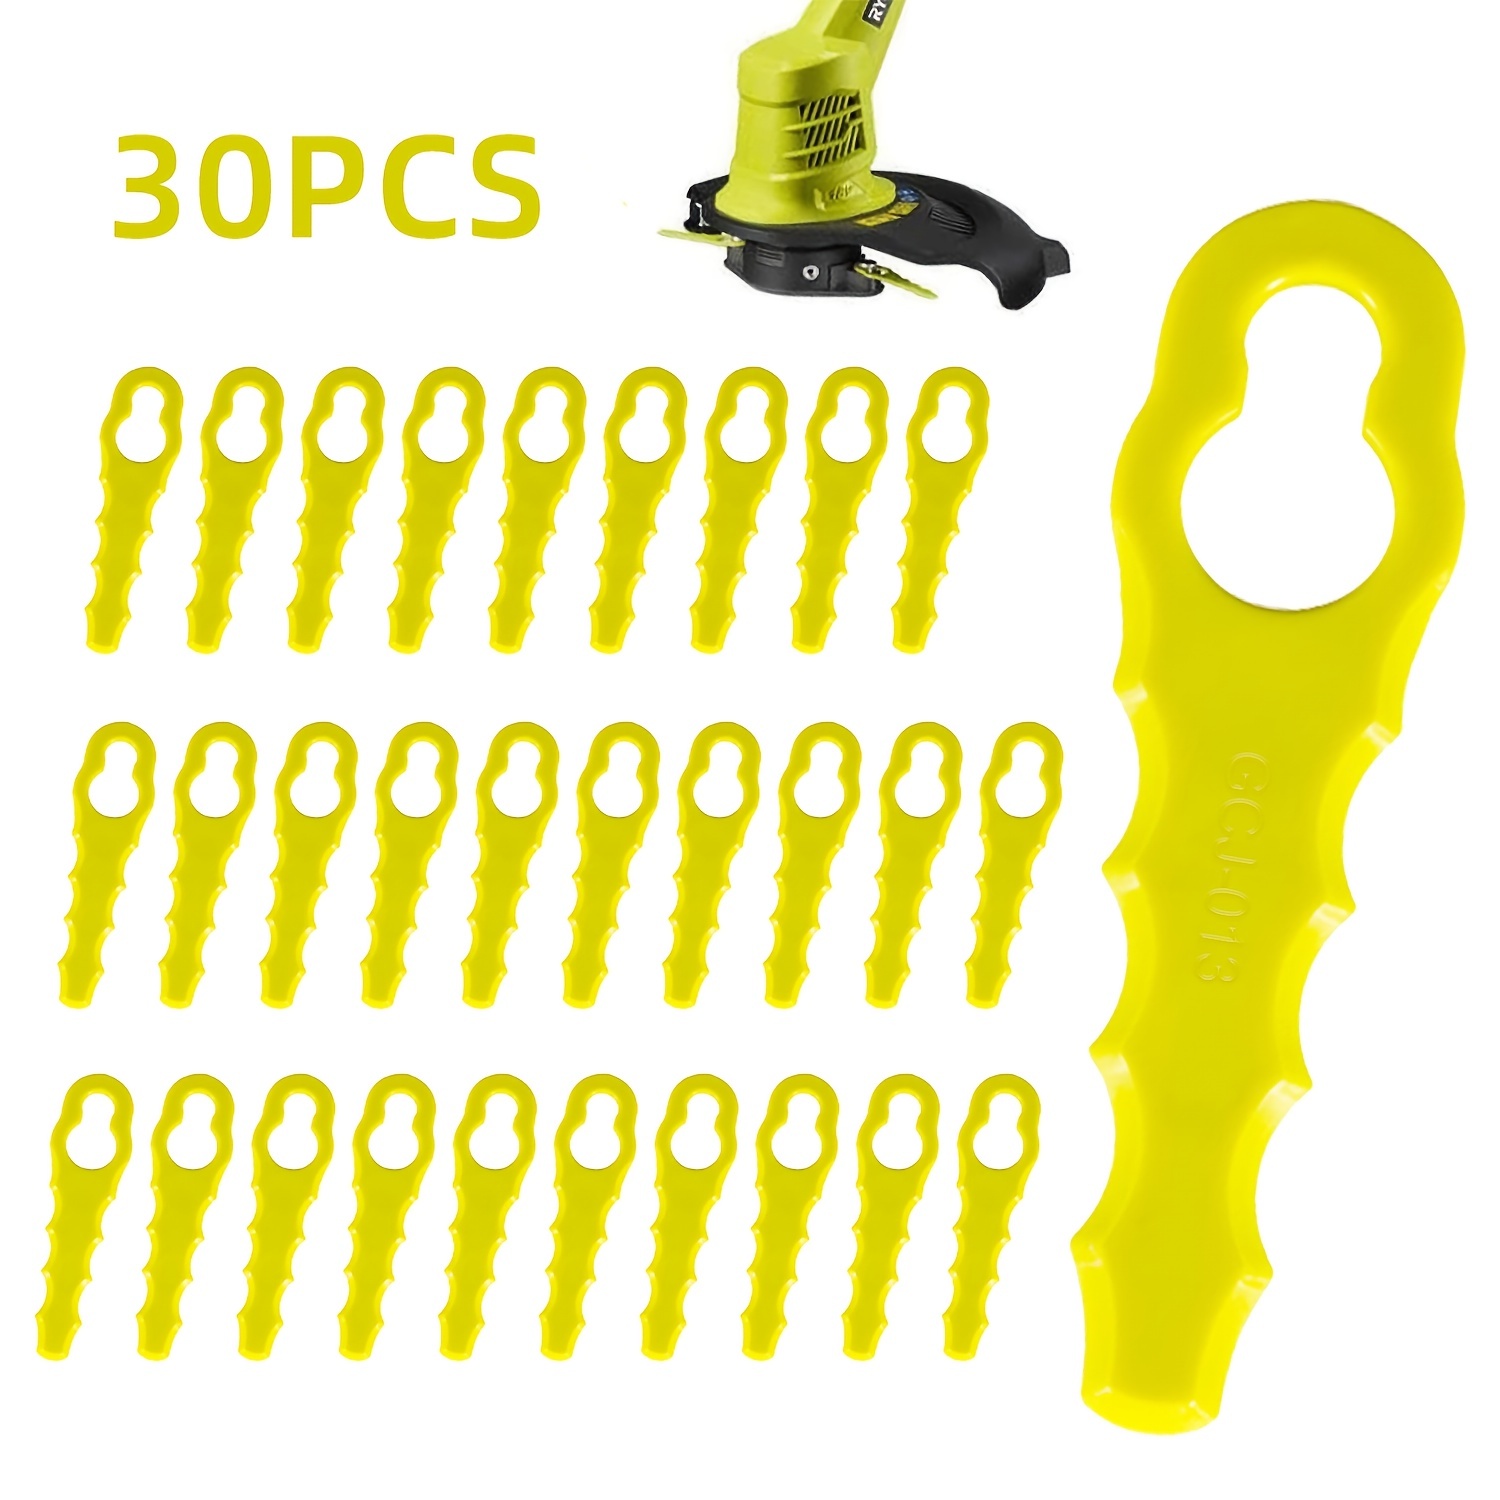 

30pcs Replacement Blades High Performance Blade, Plastic Blade Accessories For Grass Trimmer, Replacement Parts & Accessories